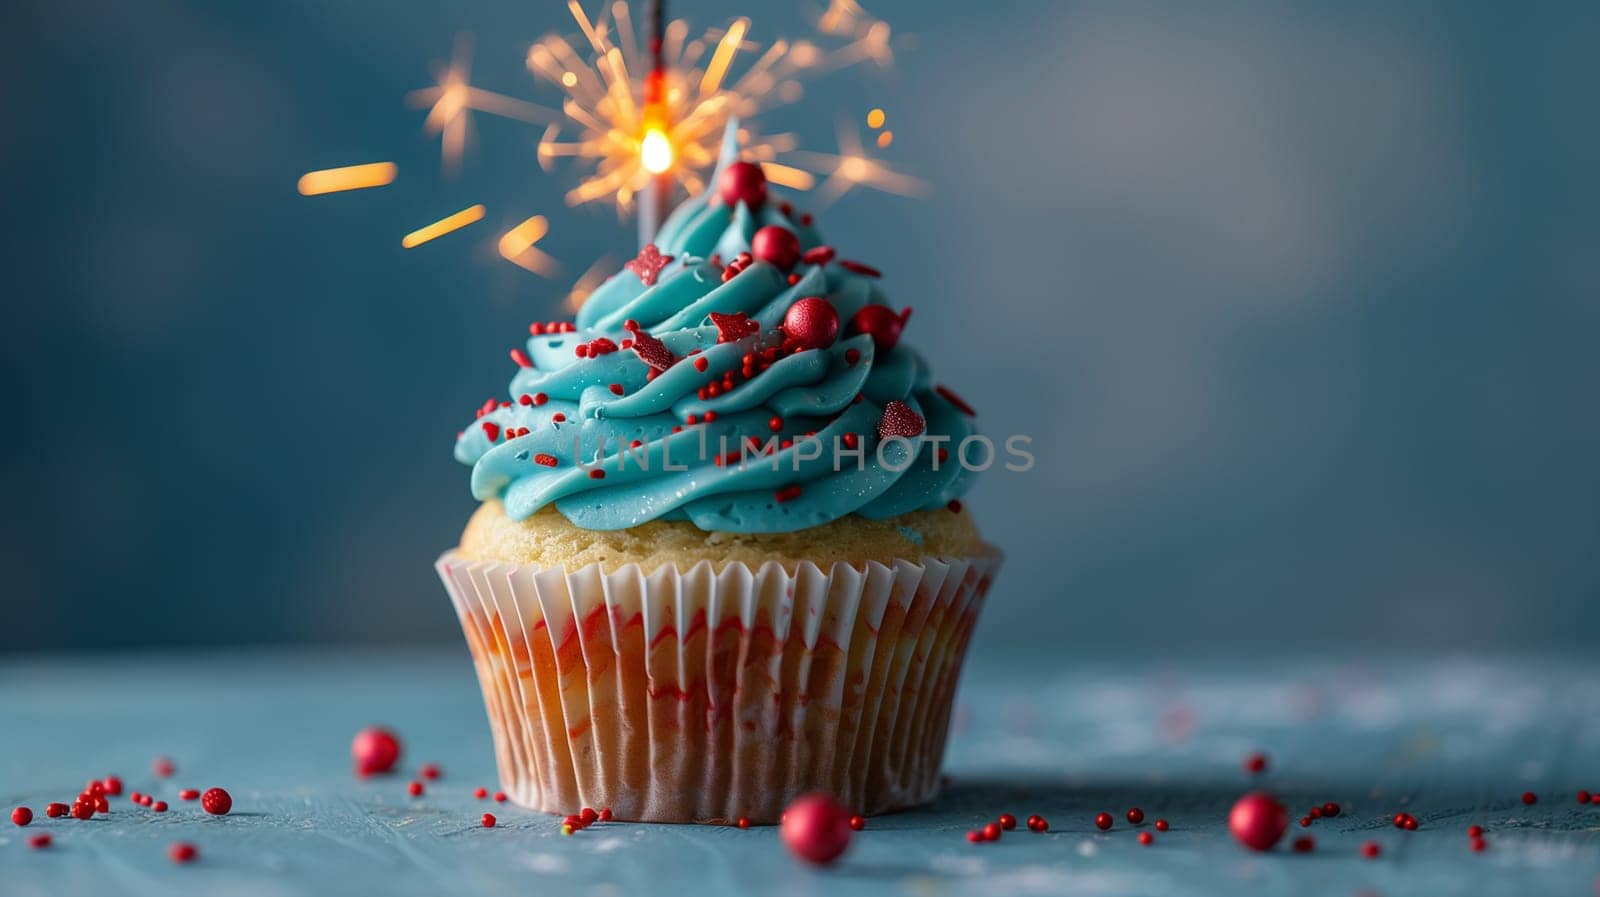 A cupcake topped with vibrant blue frosting and colorful sprinkles.